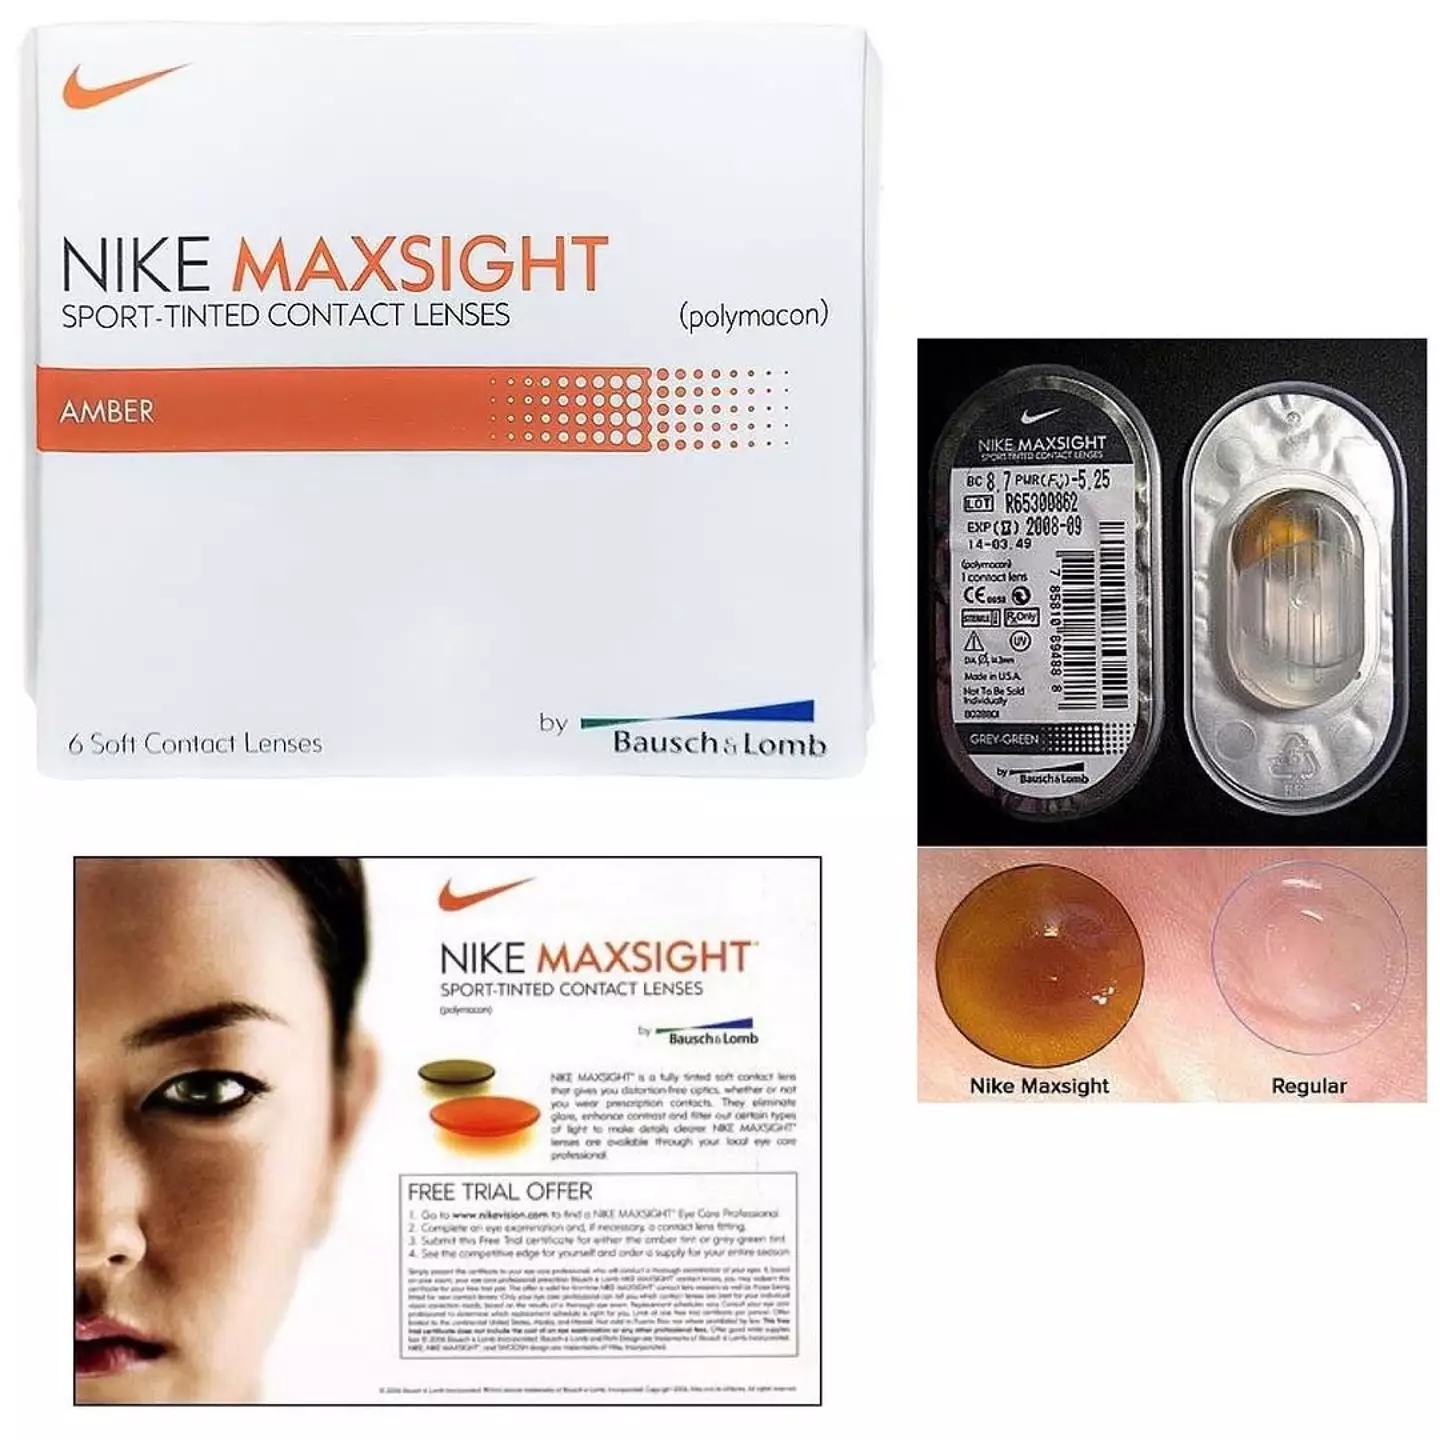 Fans are only just hearing of Nike’s UV-Blocking contact lenses.